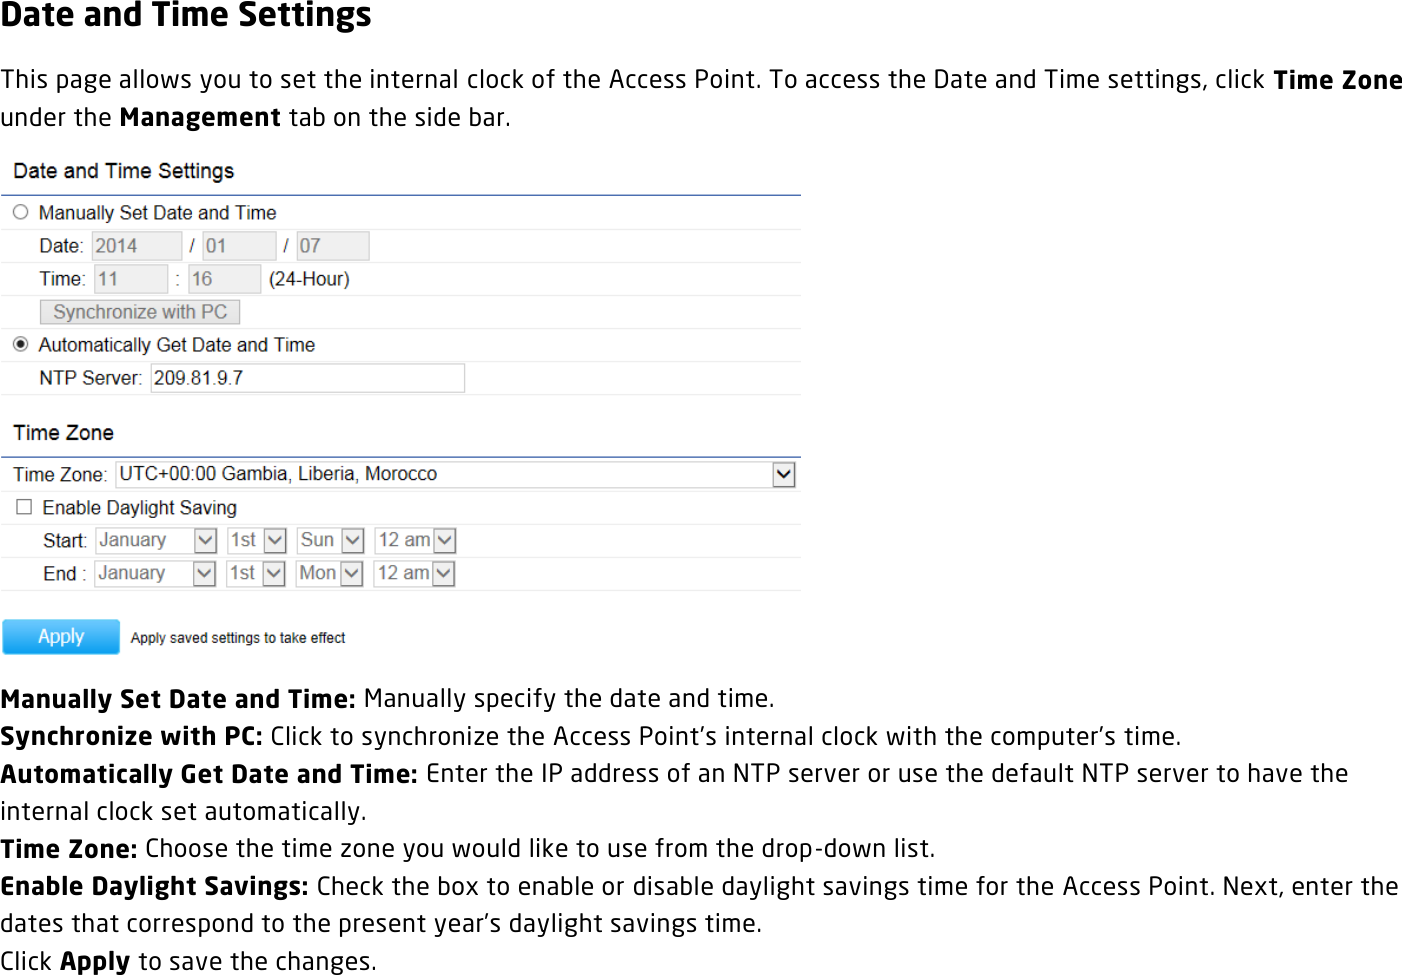 Date and Time Settings This page allows you to set the internal clock of the Access Point. To access the Date and Time settings, click Time Zone under the Management tab on the side bar.  Manually Set Date and Time: Manually specify the date and time. Synchronize with PC: Click to synchronize the Access Point’s internal clock with the computer’s time. Automatically Get Date and Time: Enter the IP address of an NTP server or use the default NTP server to have the internal clock set automatically. Time Zone: Choose the time zone you would like to use from the drop-down list. Enable Daylight Savings: Check the box to enable or disable daylight savings time for the Access Point. Next, enter the dates that correspond to the present year’s daylight savings time.   Click Apply to save the changes.  